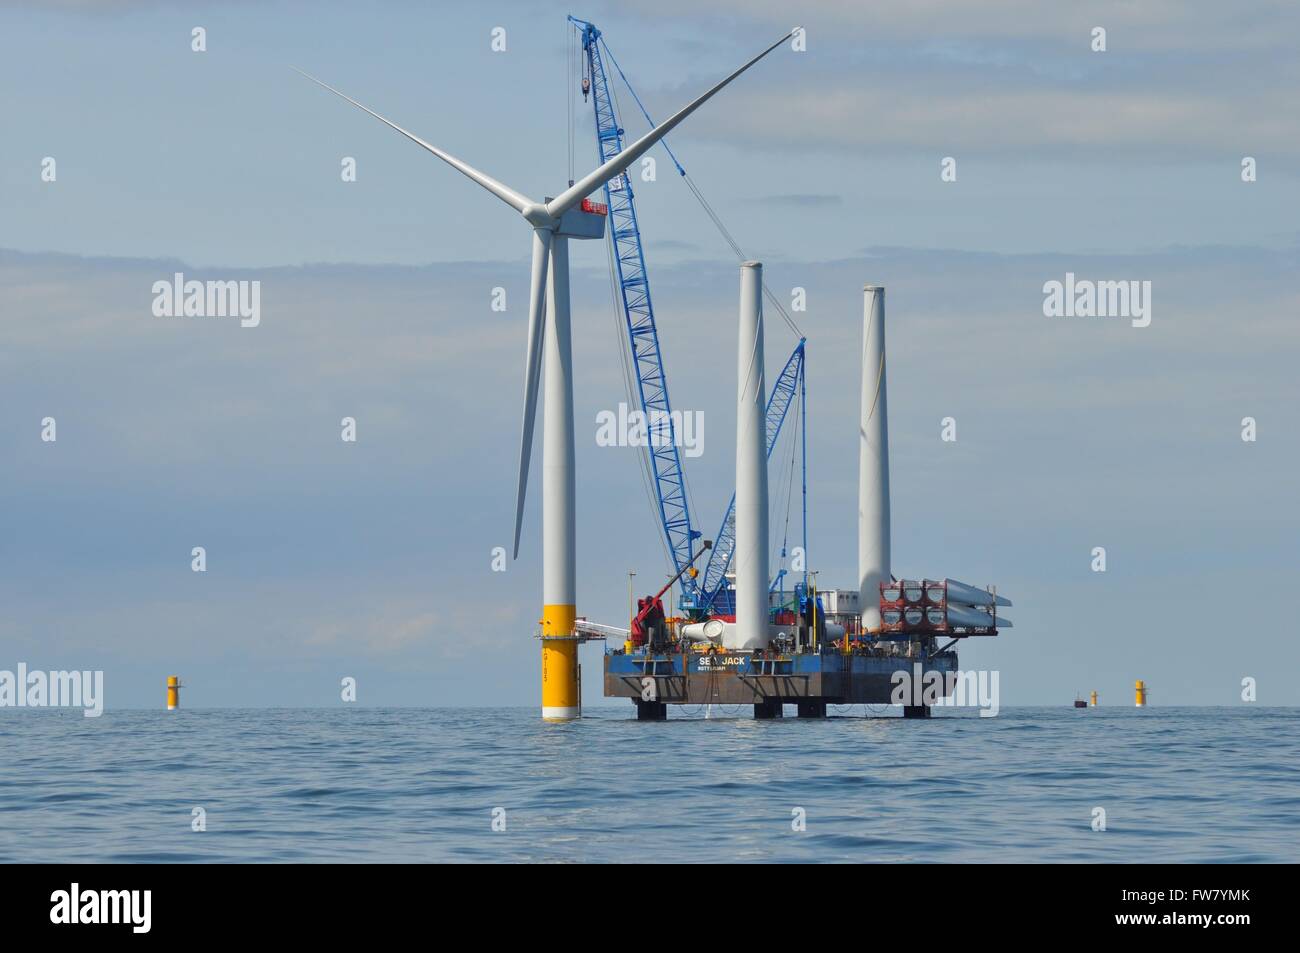 Construction of the offshore wind turbines at the Greater Gabbard wind farm off the coast of Suffolk, England. The alternative energy project was completed in 2012 at a cost of $2 billion dollars. Stock Photo